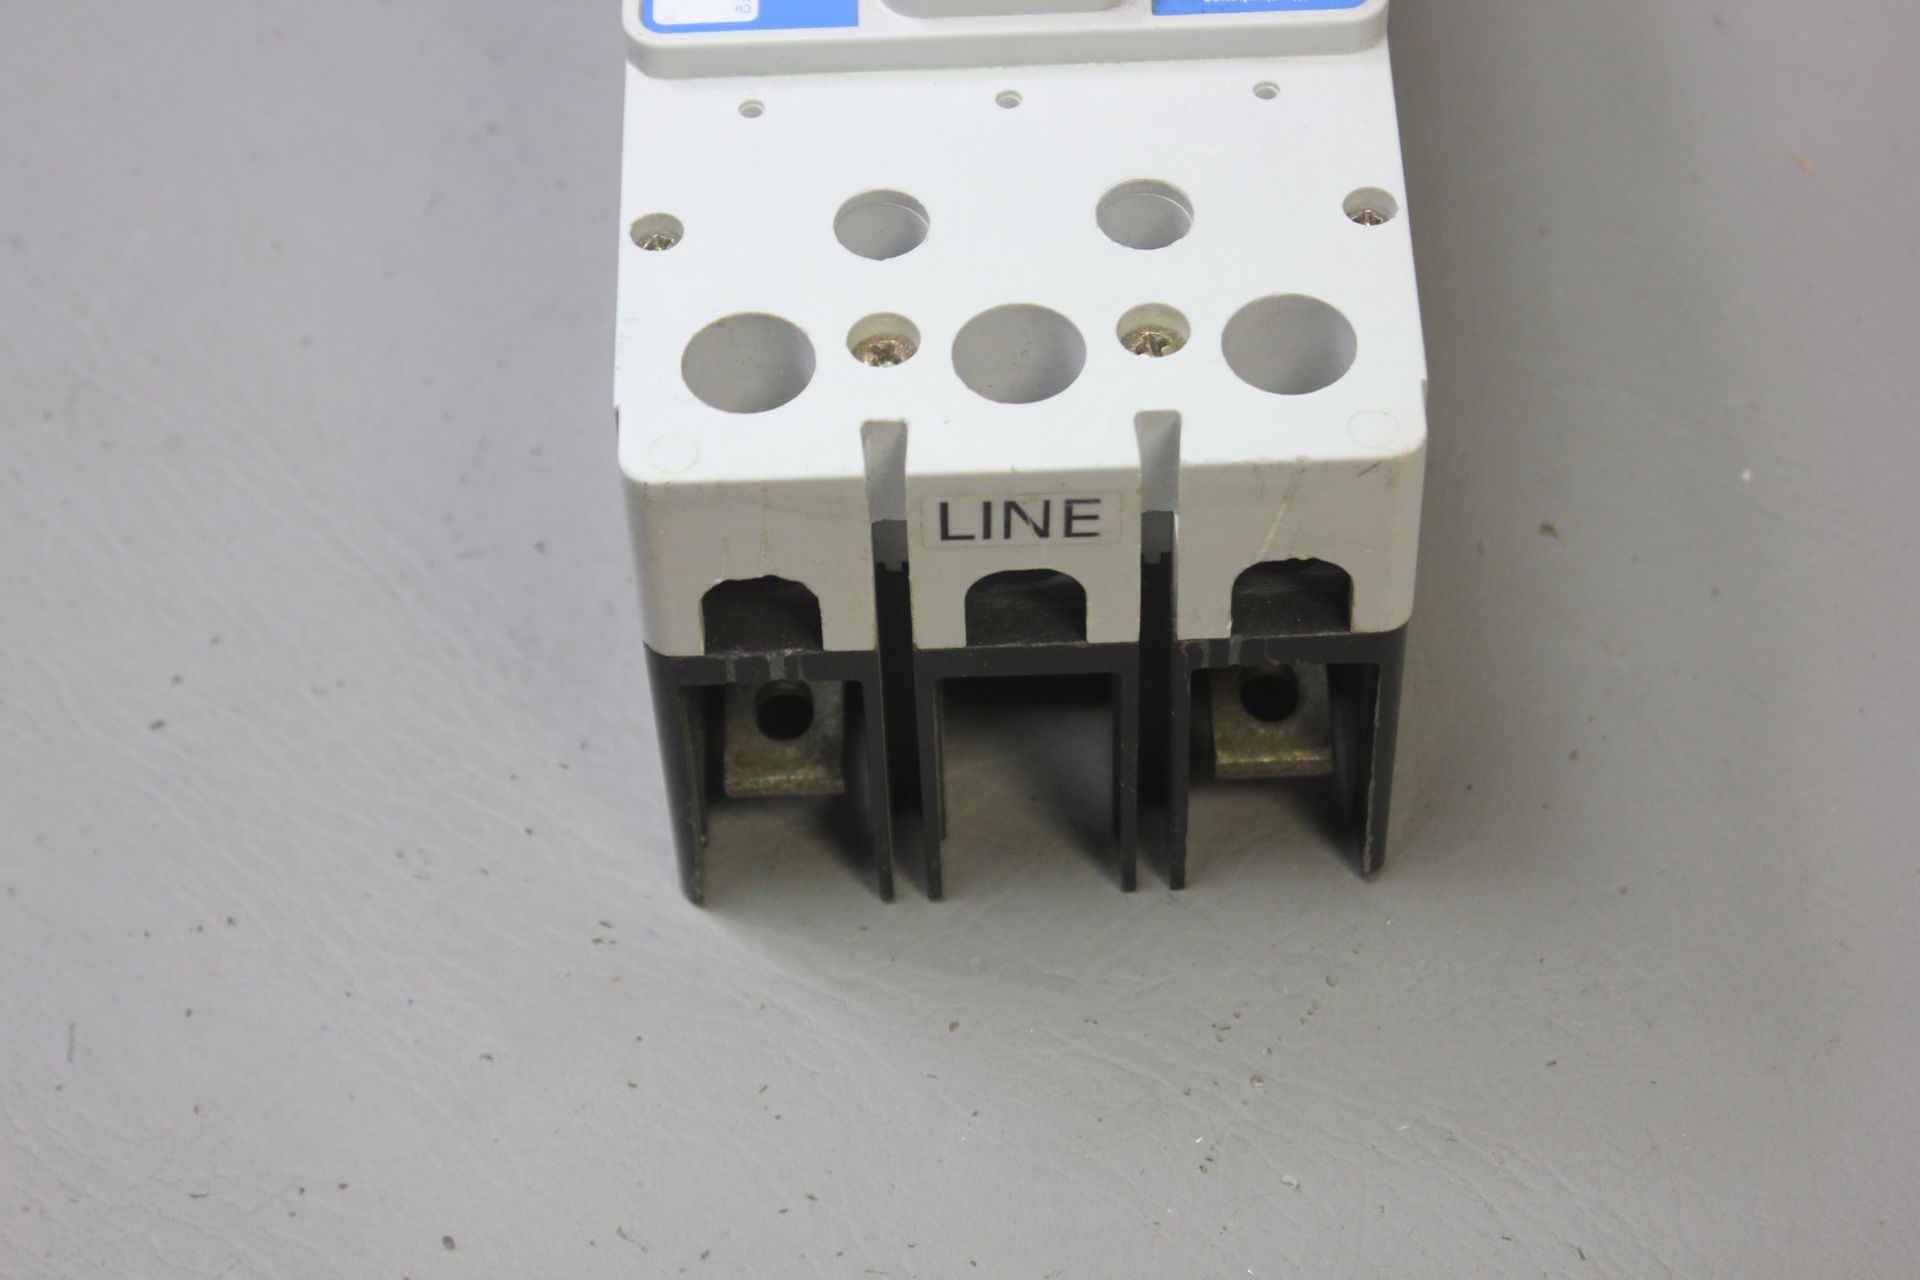 WESTINGHOUSE 250A INDUSTRIAL CIRCUIT BREAKER WITH TRIP UNIT - Image 4 of 6